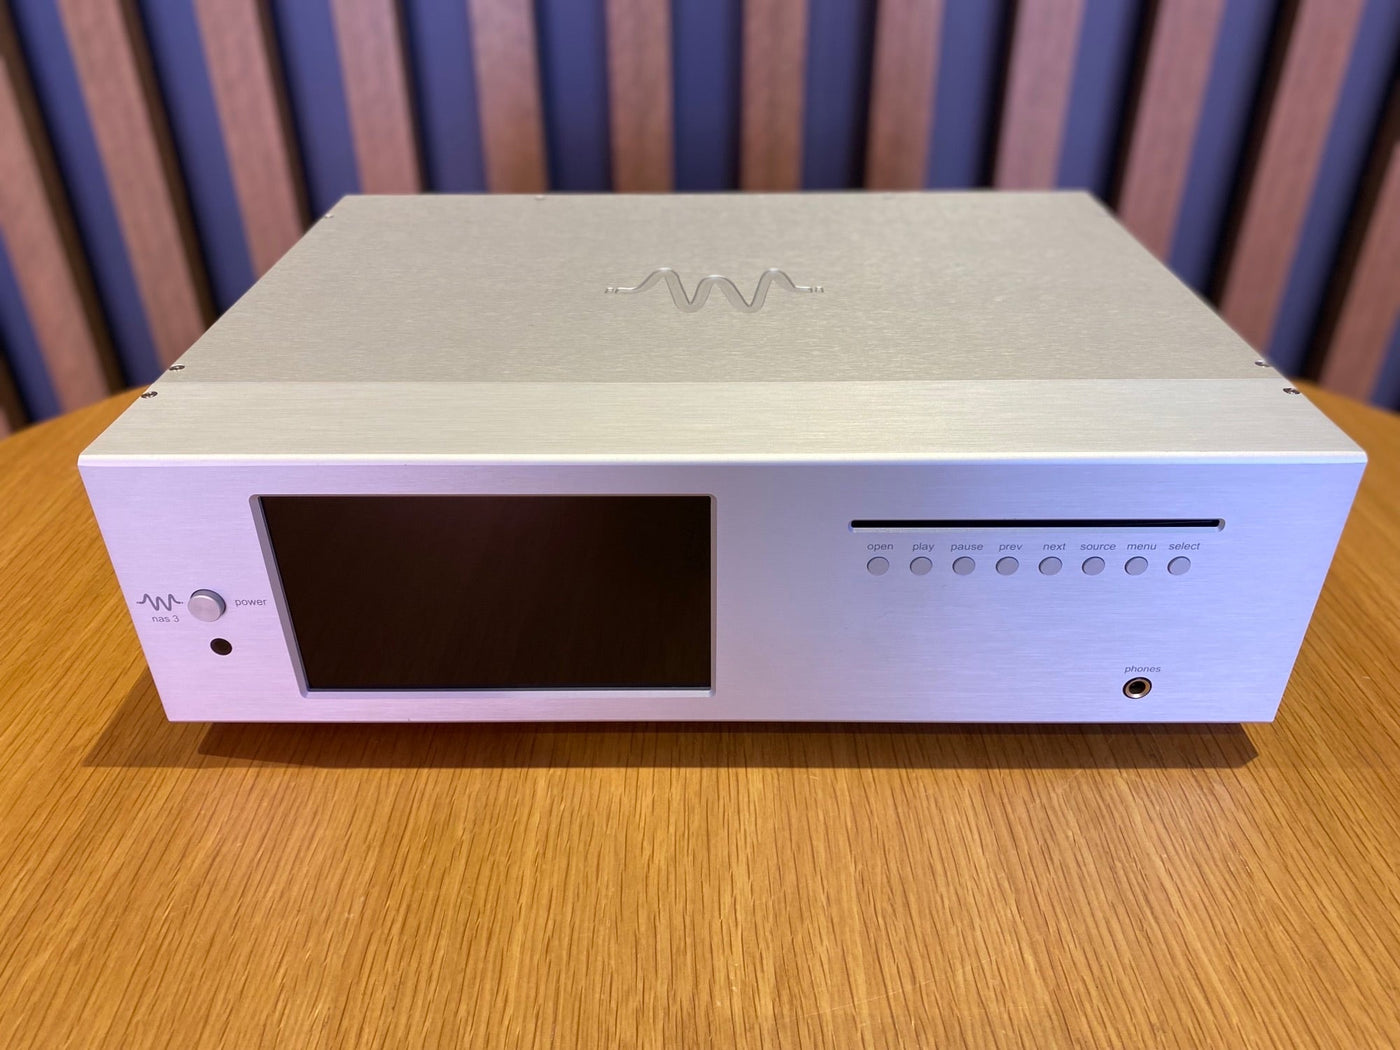 Waversa WNAS 3 - Universal Digital Source with FM Tuner - As Traded